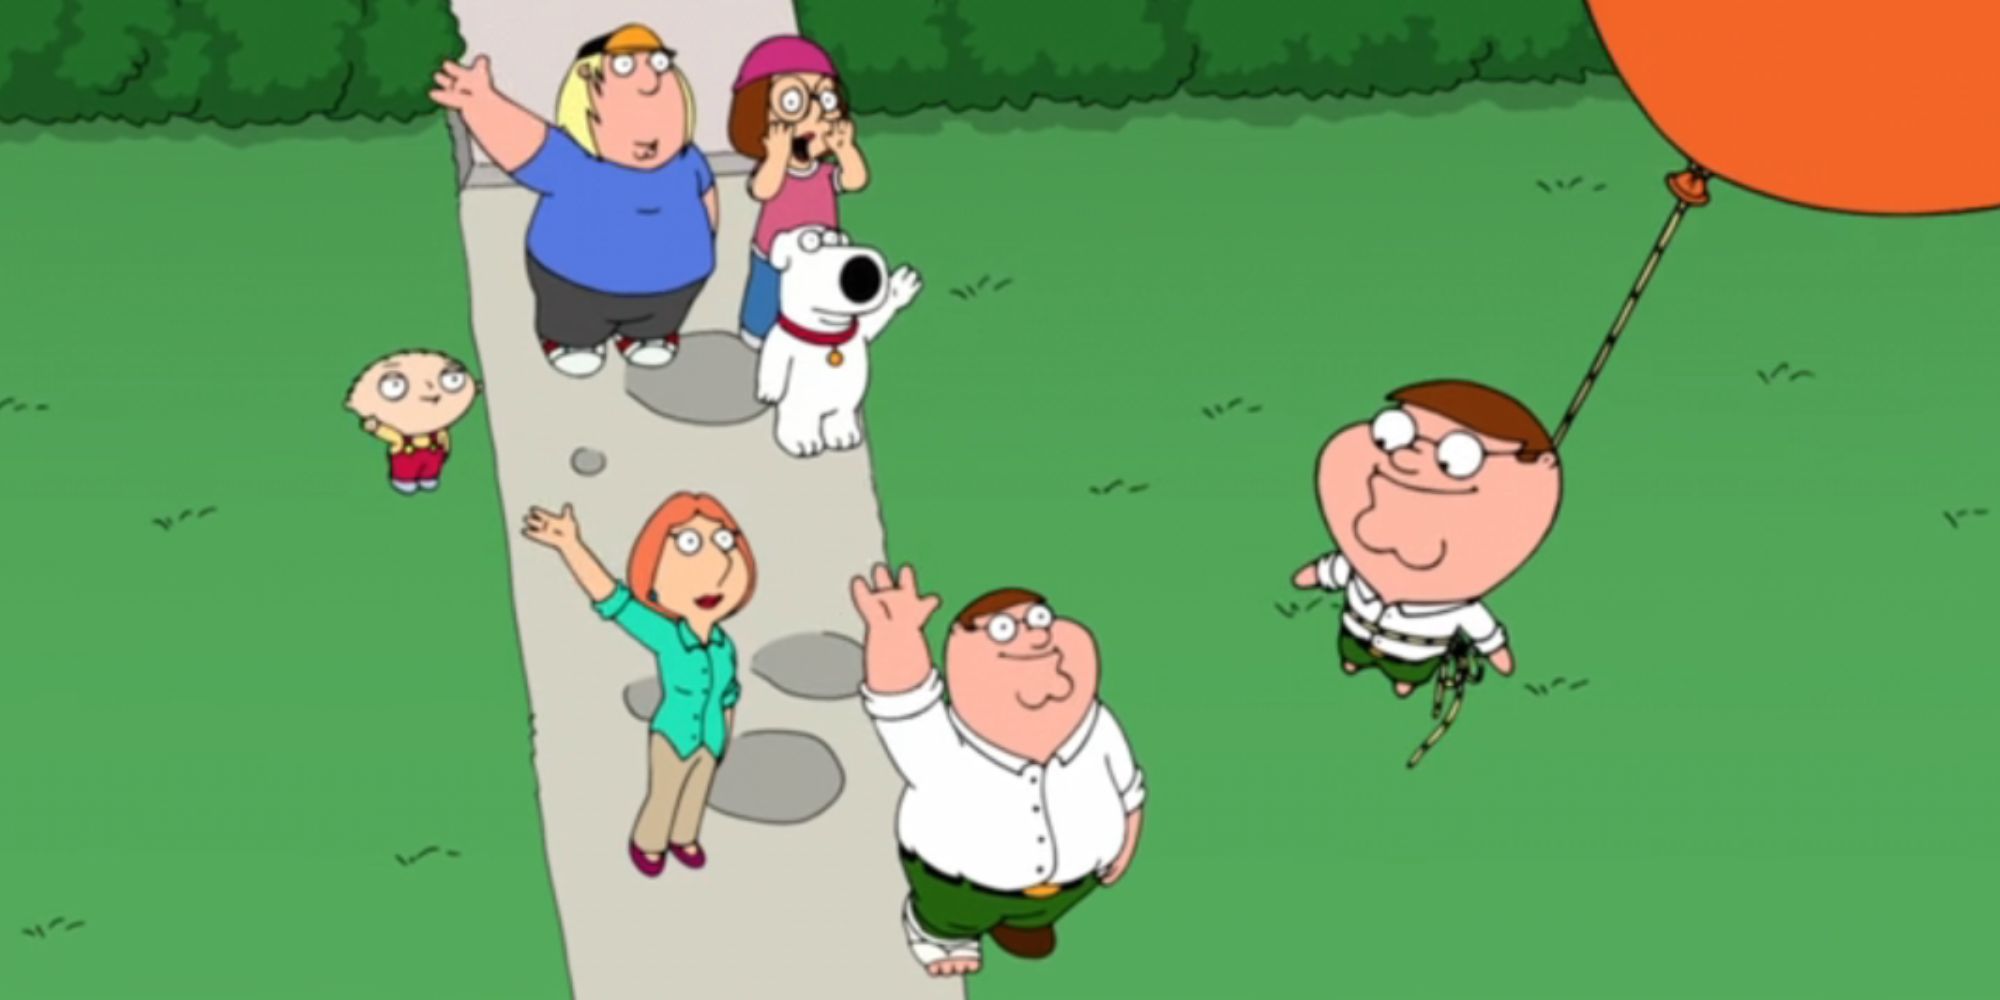 Chip floating away tied to a balloon as the Griffins bid him farewell from below in Family Guy